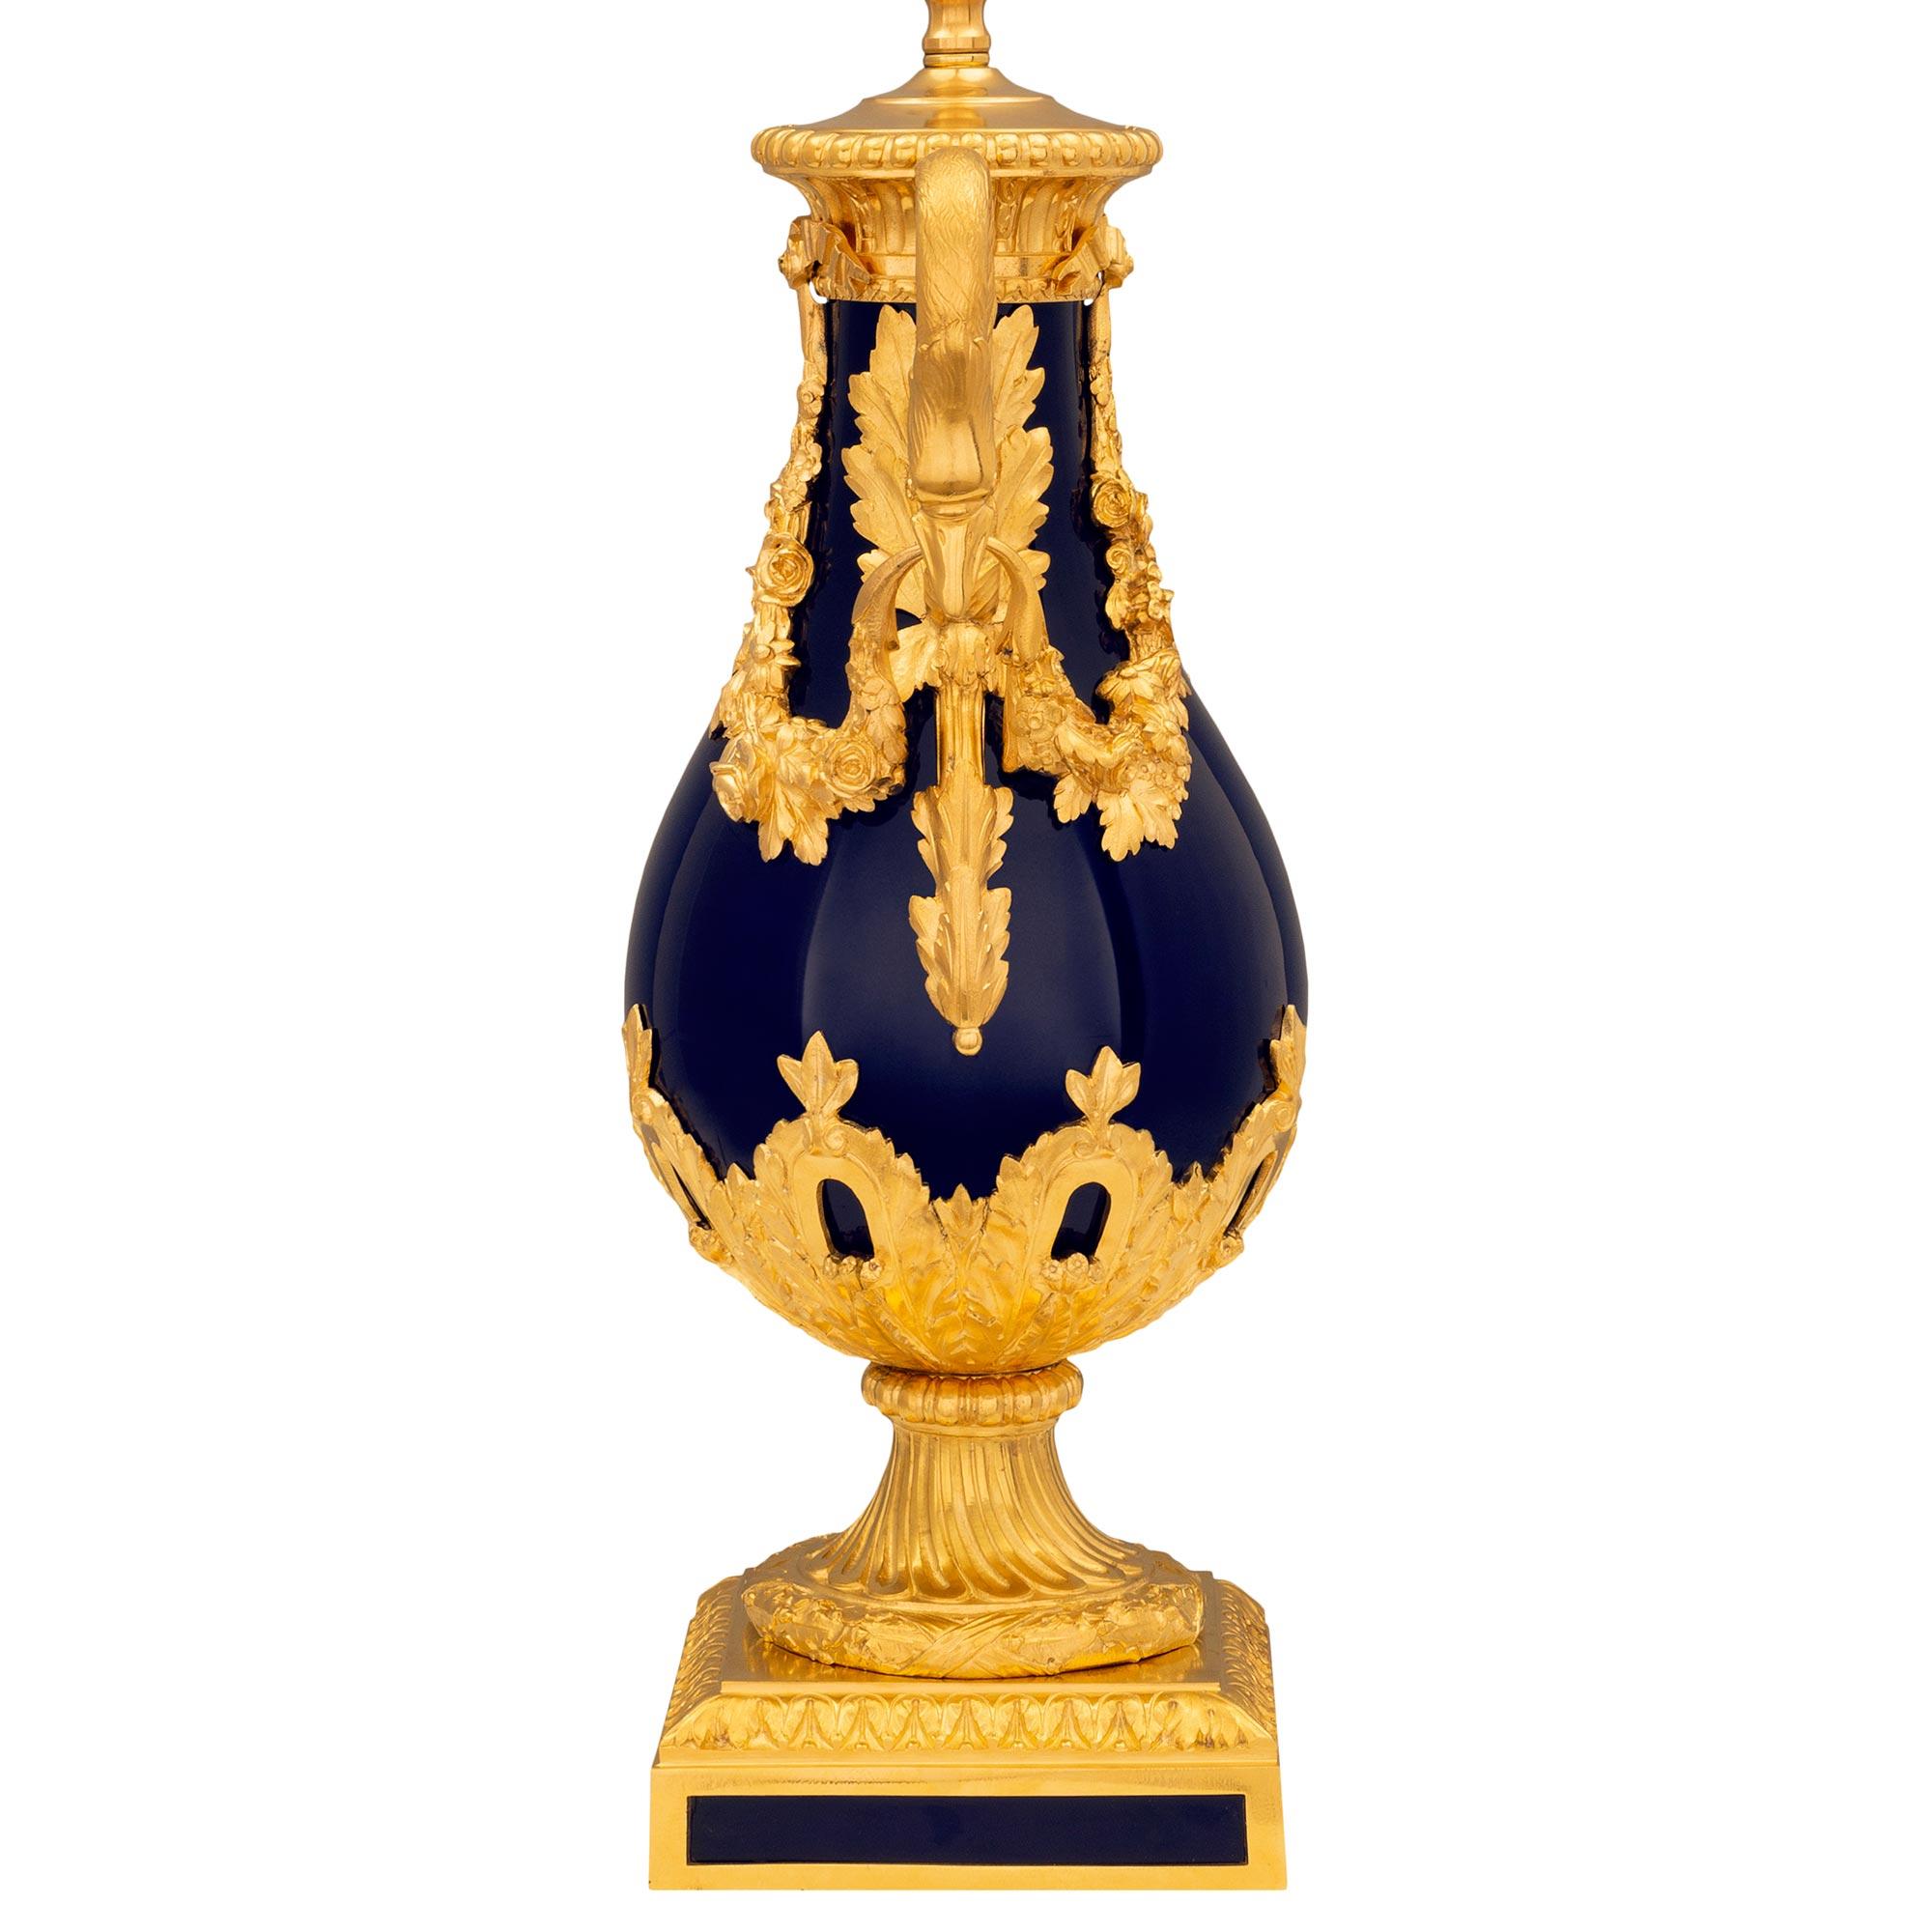 French 19th Century Louis XVI St. Cobalt Blue Sèvres Porcelain And Ormolu Lamp In Good Condition For Sale In West Palm Beach, FL